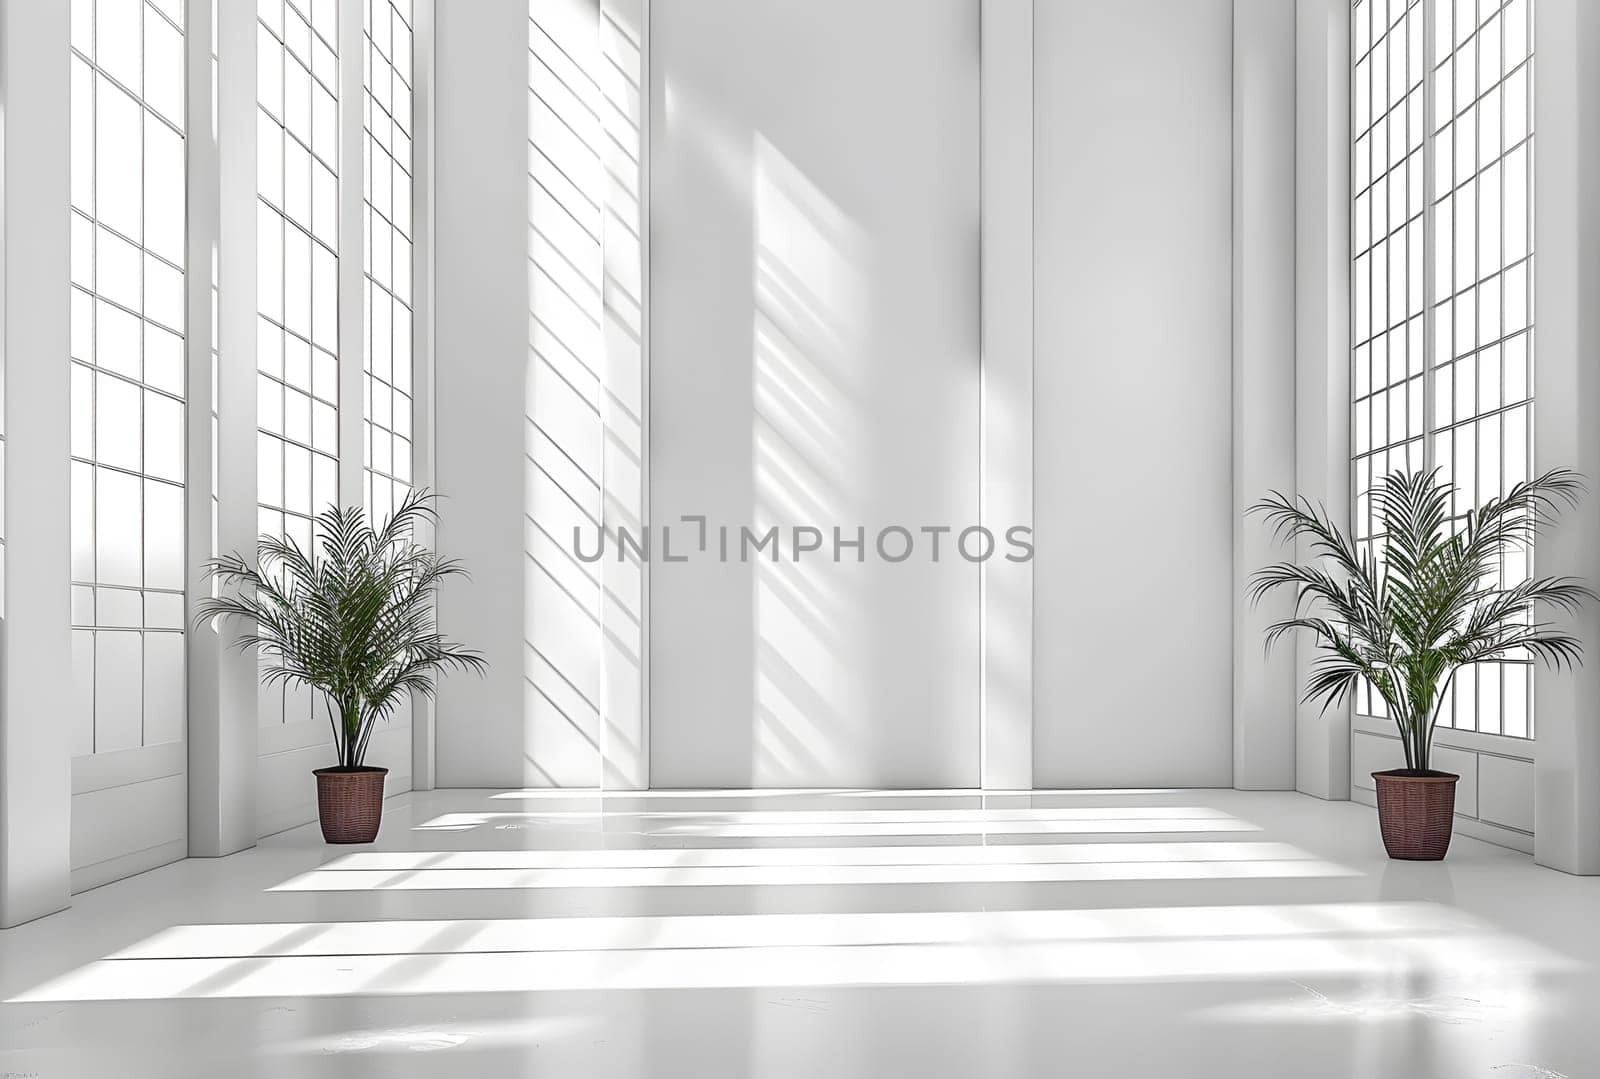 An interior design featuring a white room with two houseplants in flowerpots, wooden flooring, fixtures, and lots of windows for natural light